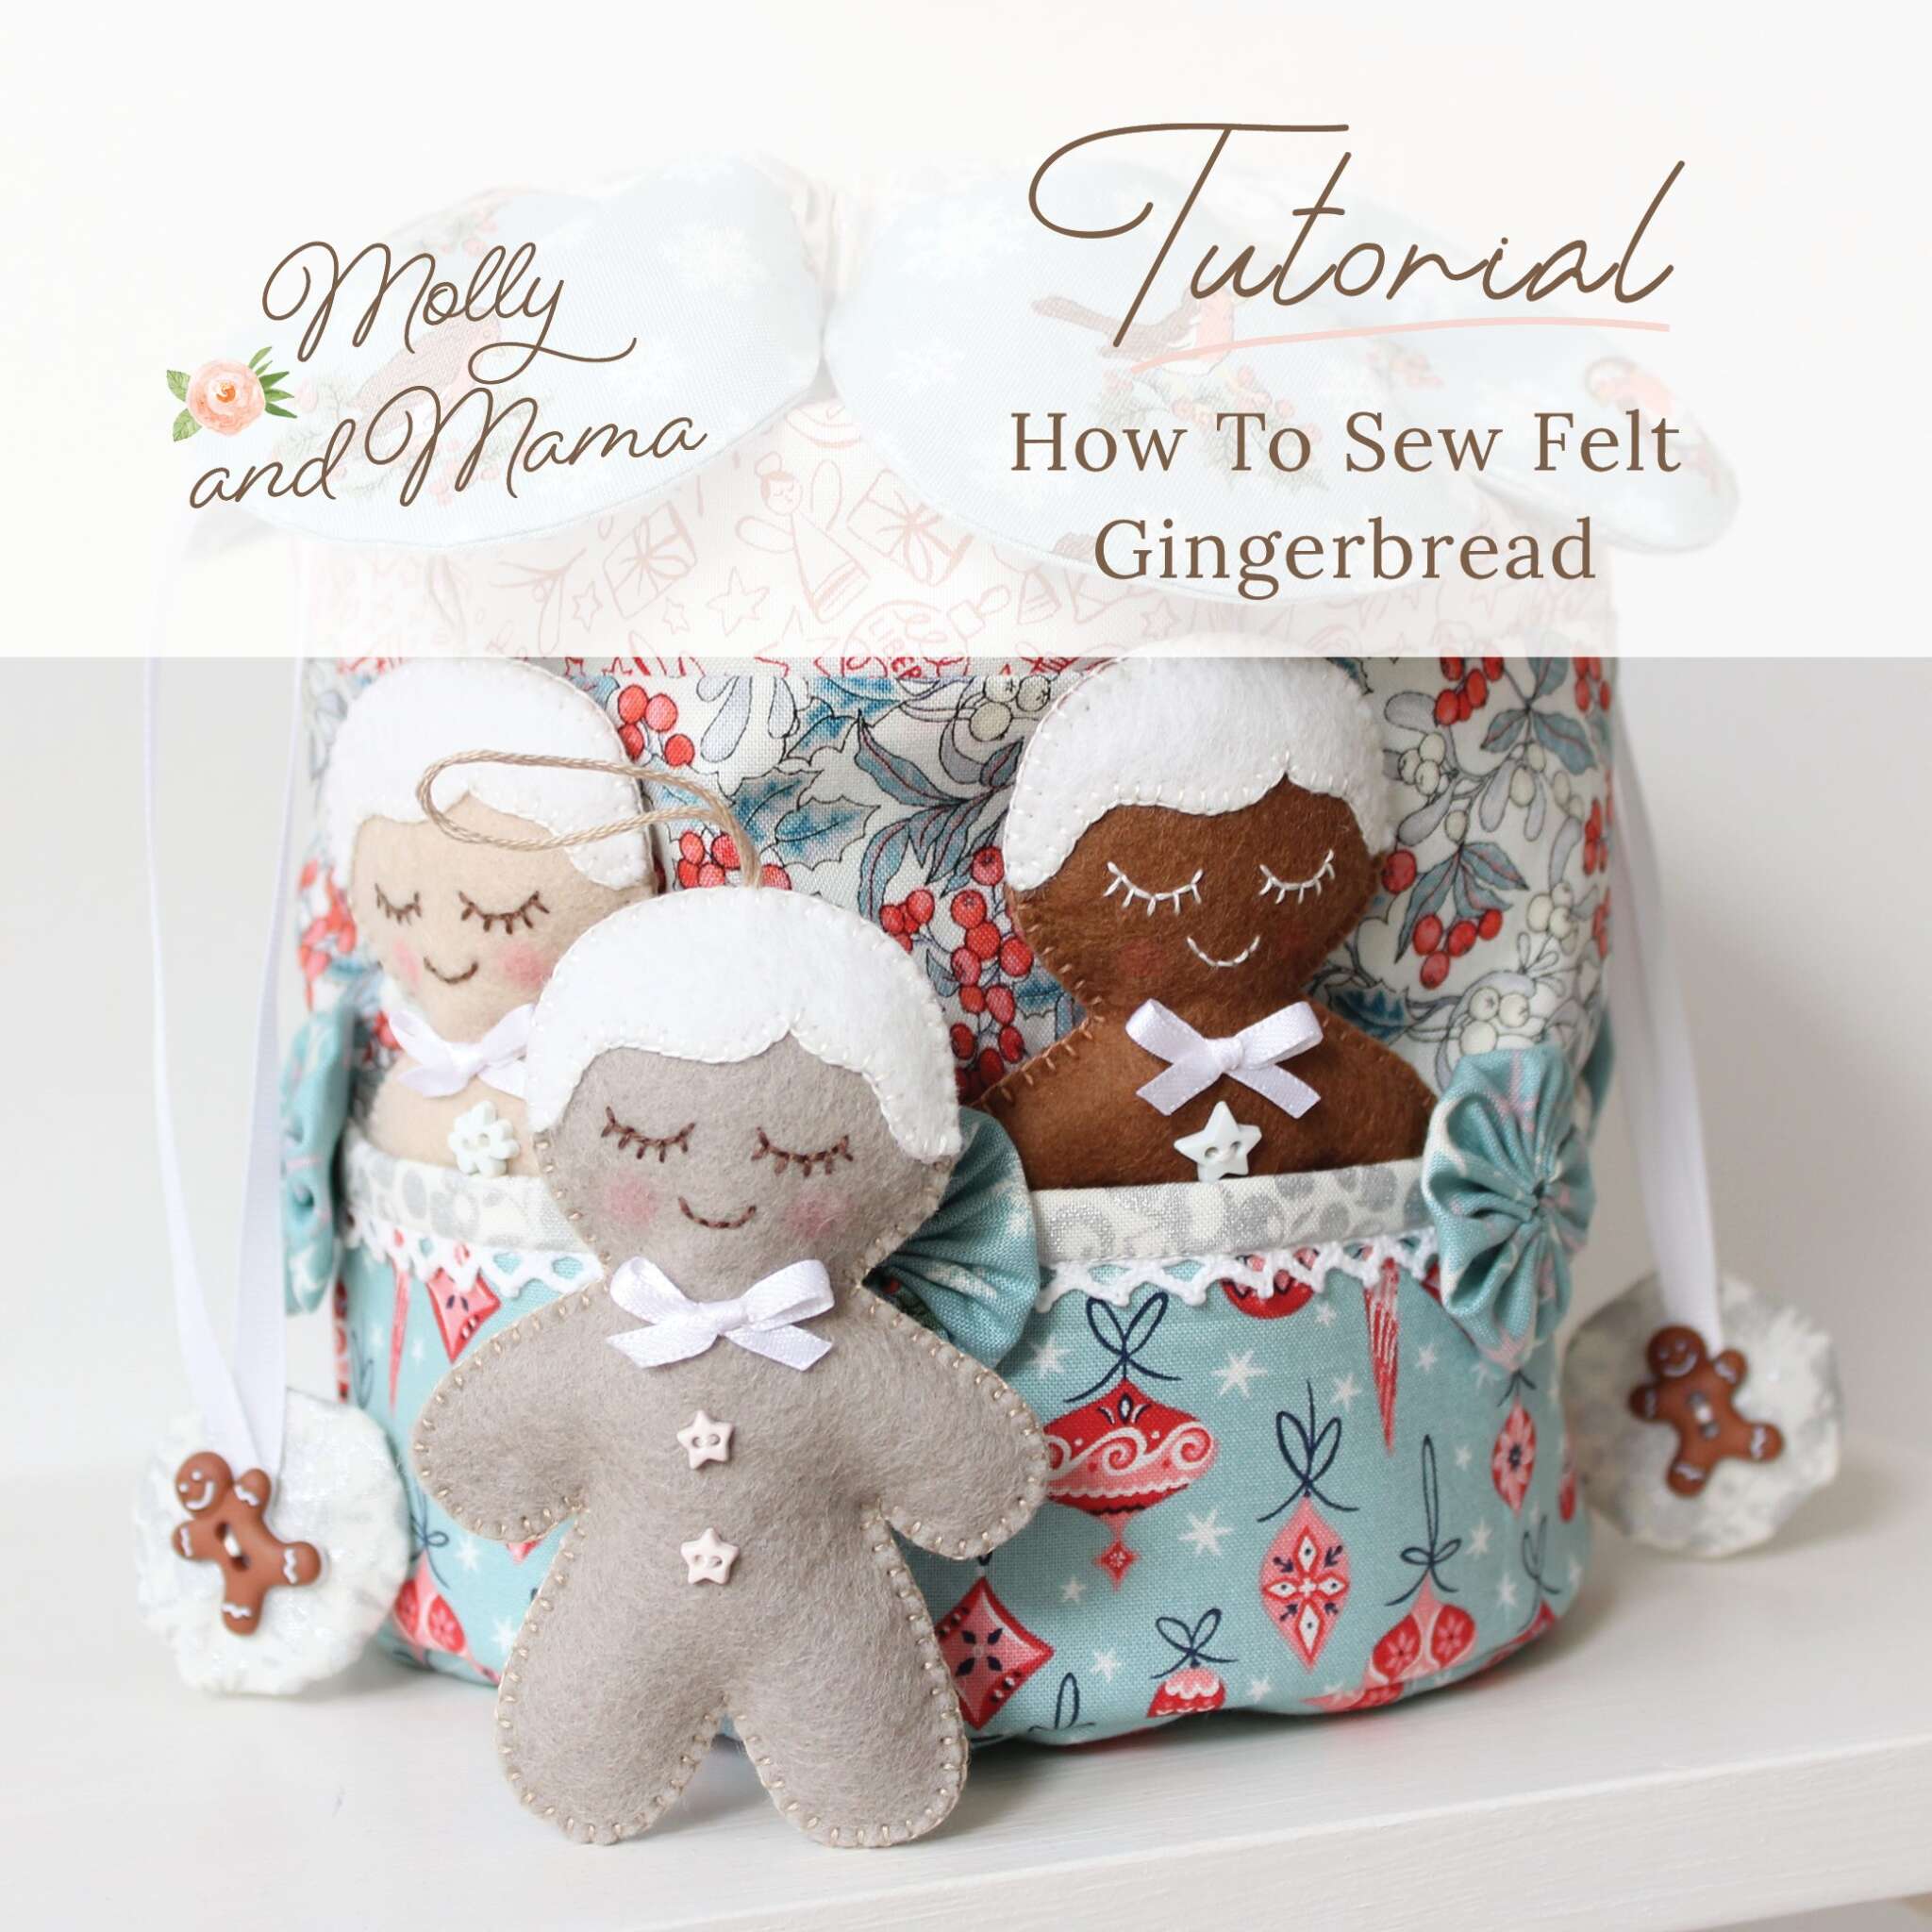 Sew A Gingerbread Ornament and Pretty Christmas Dilly Bag